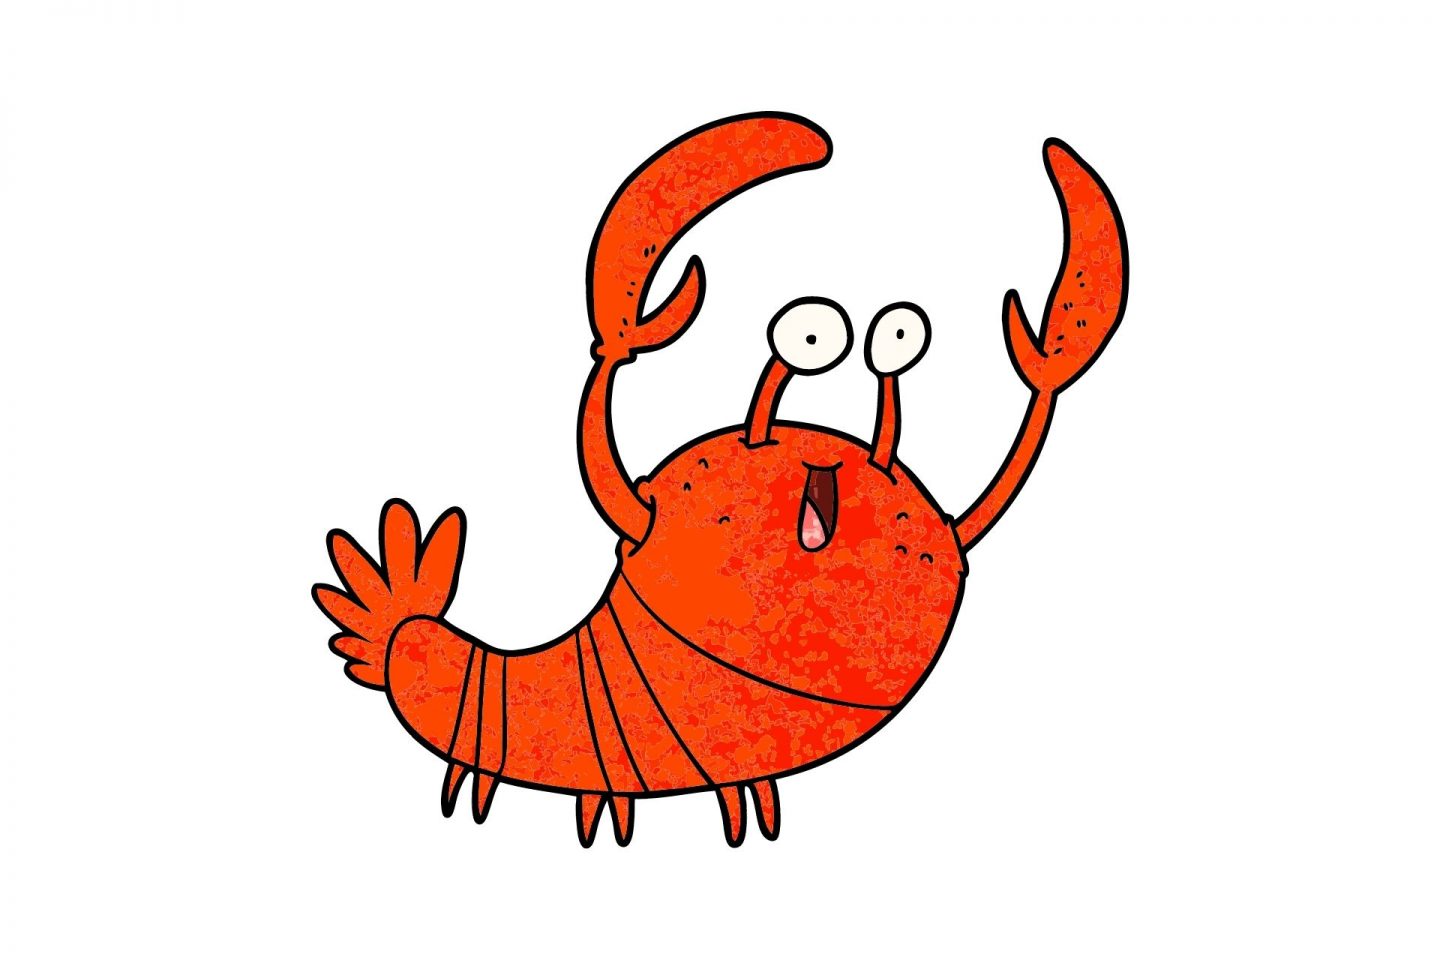 A drawing of a brightly coloured lobster against a white background, with its pincers up and a smile on its face.